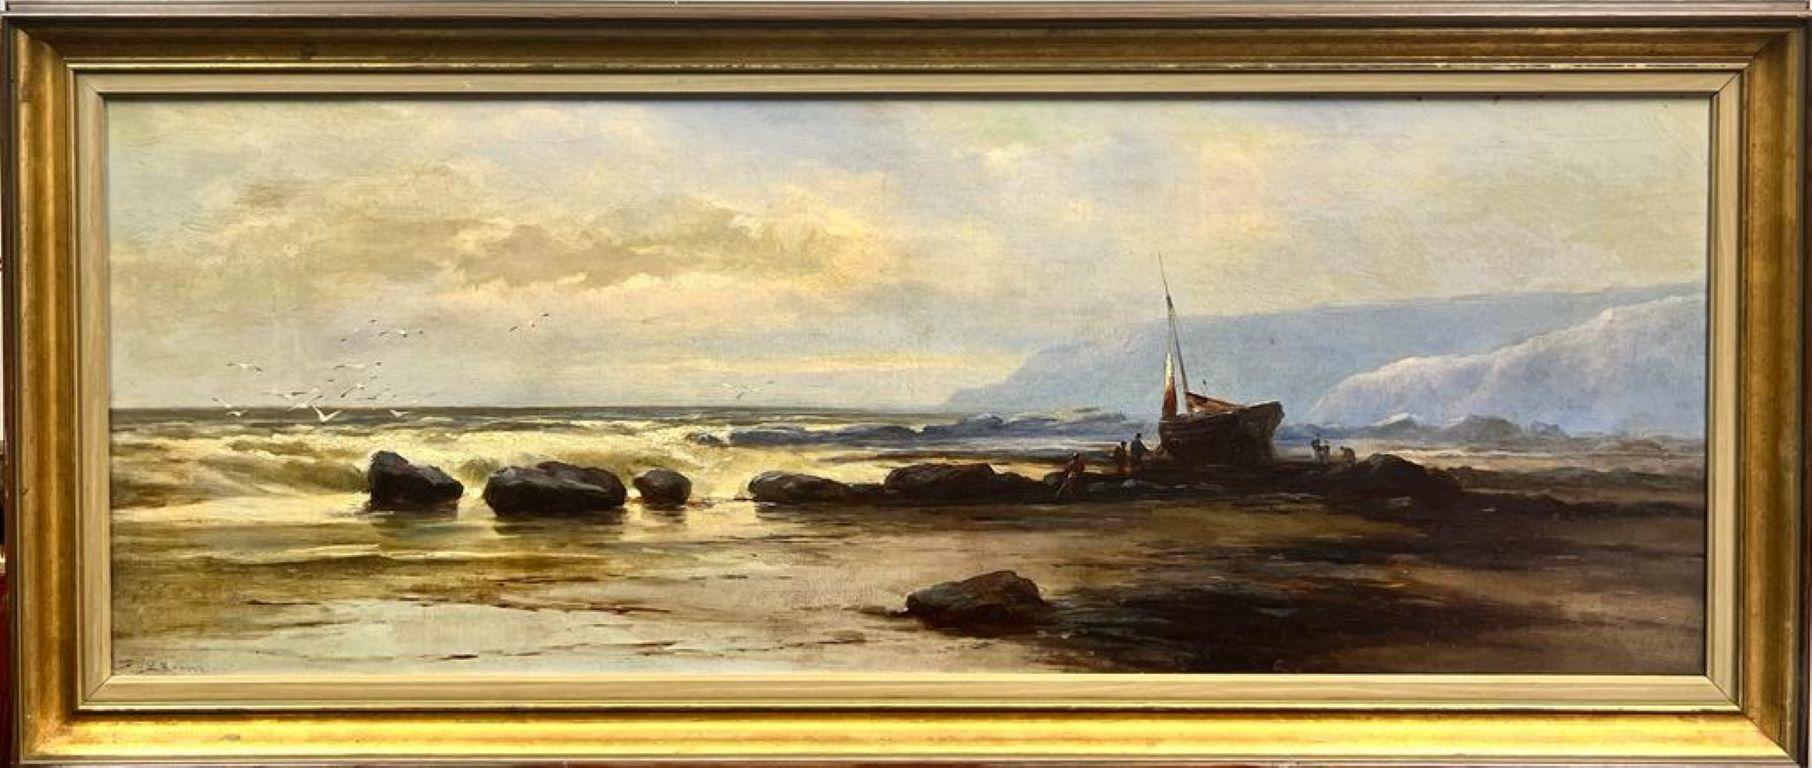 Fishermen with Boats on the Windswept Coastline Shore Antique English Oil  - Painting by Antique English Marine